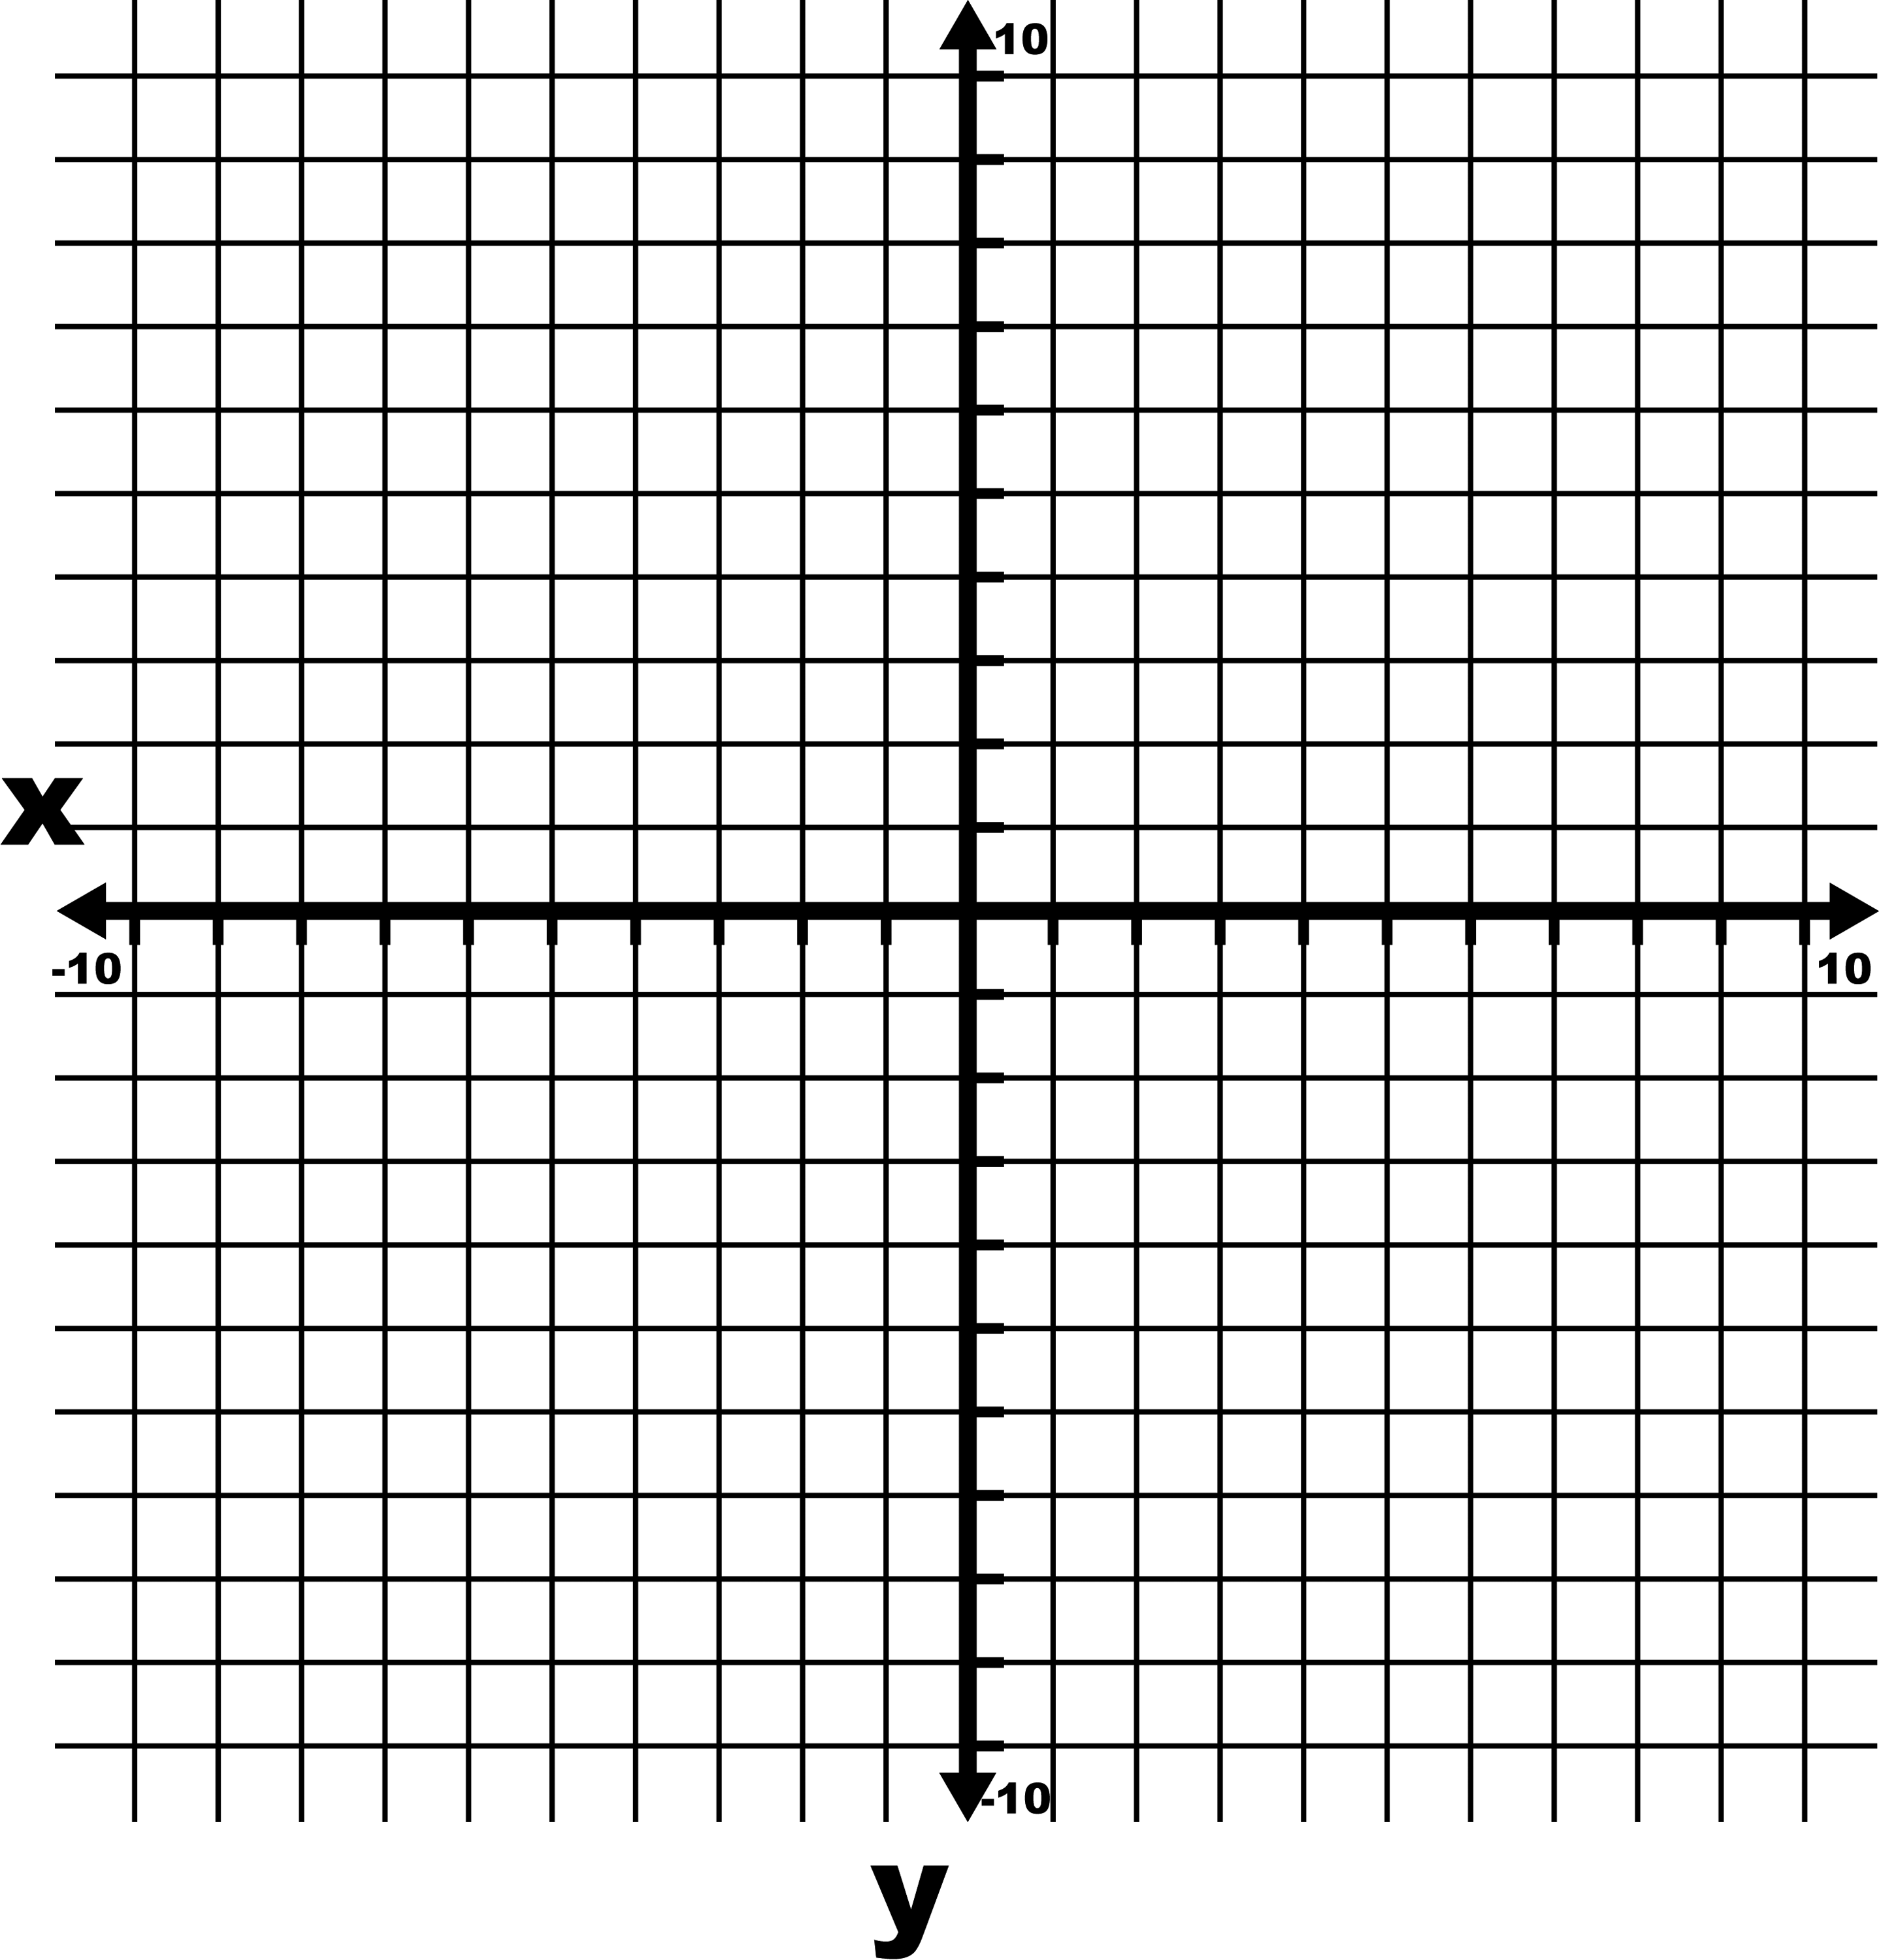 -10 To 10 Coordinate Grid With Axes And Increments Labeled By 10s And